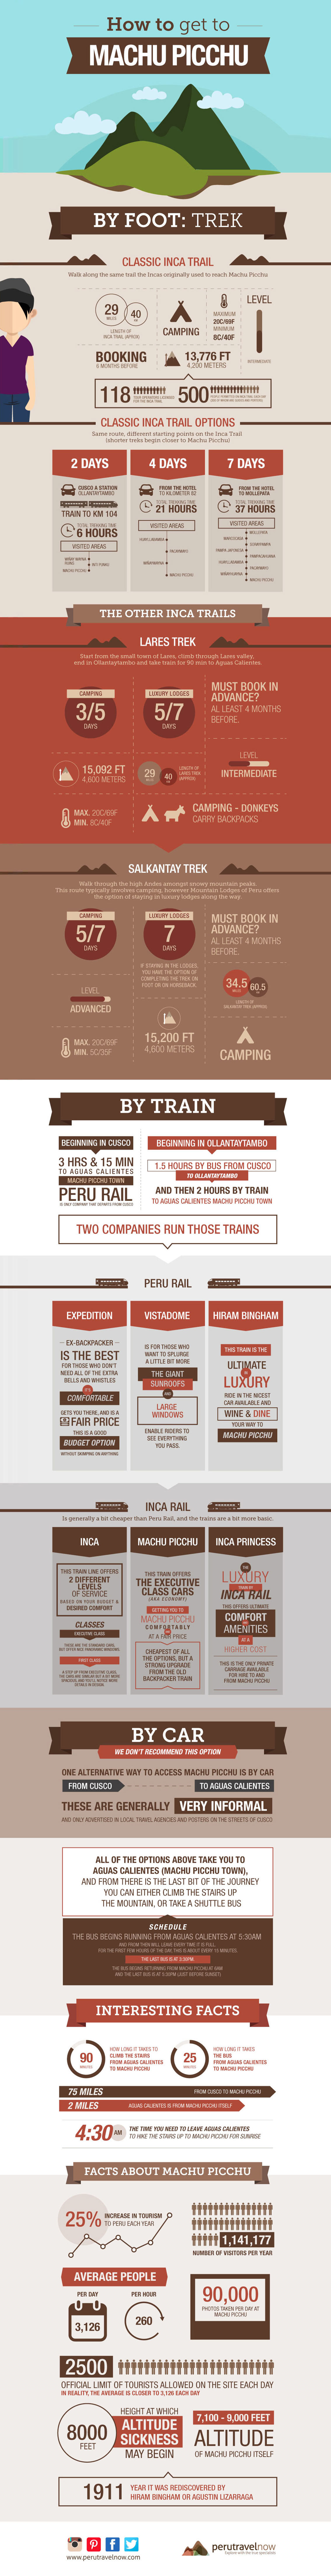 How to Visit Machu Picchu - Travel Infographic